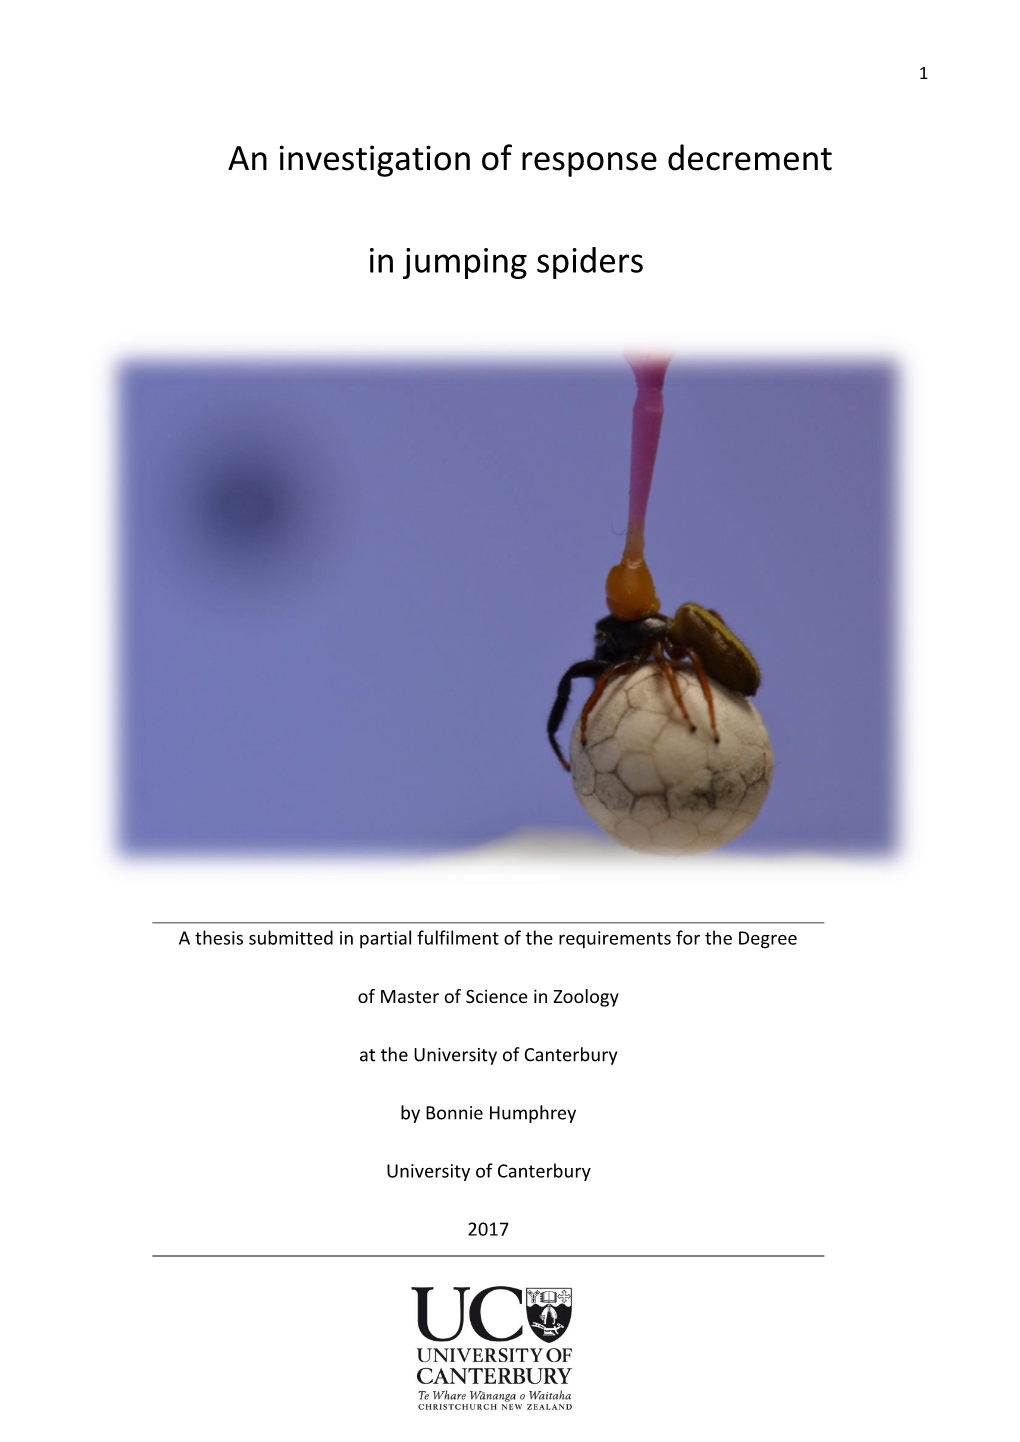 An Investigation of Response Decrement in Jumping Spiders